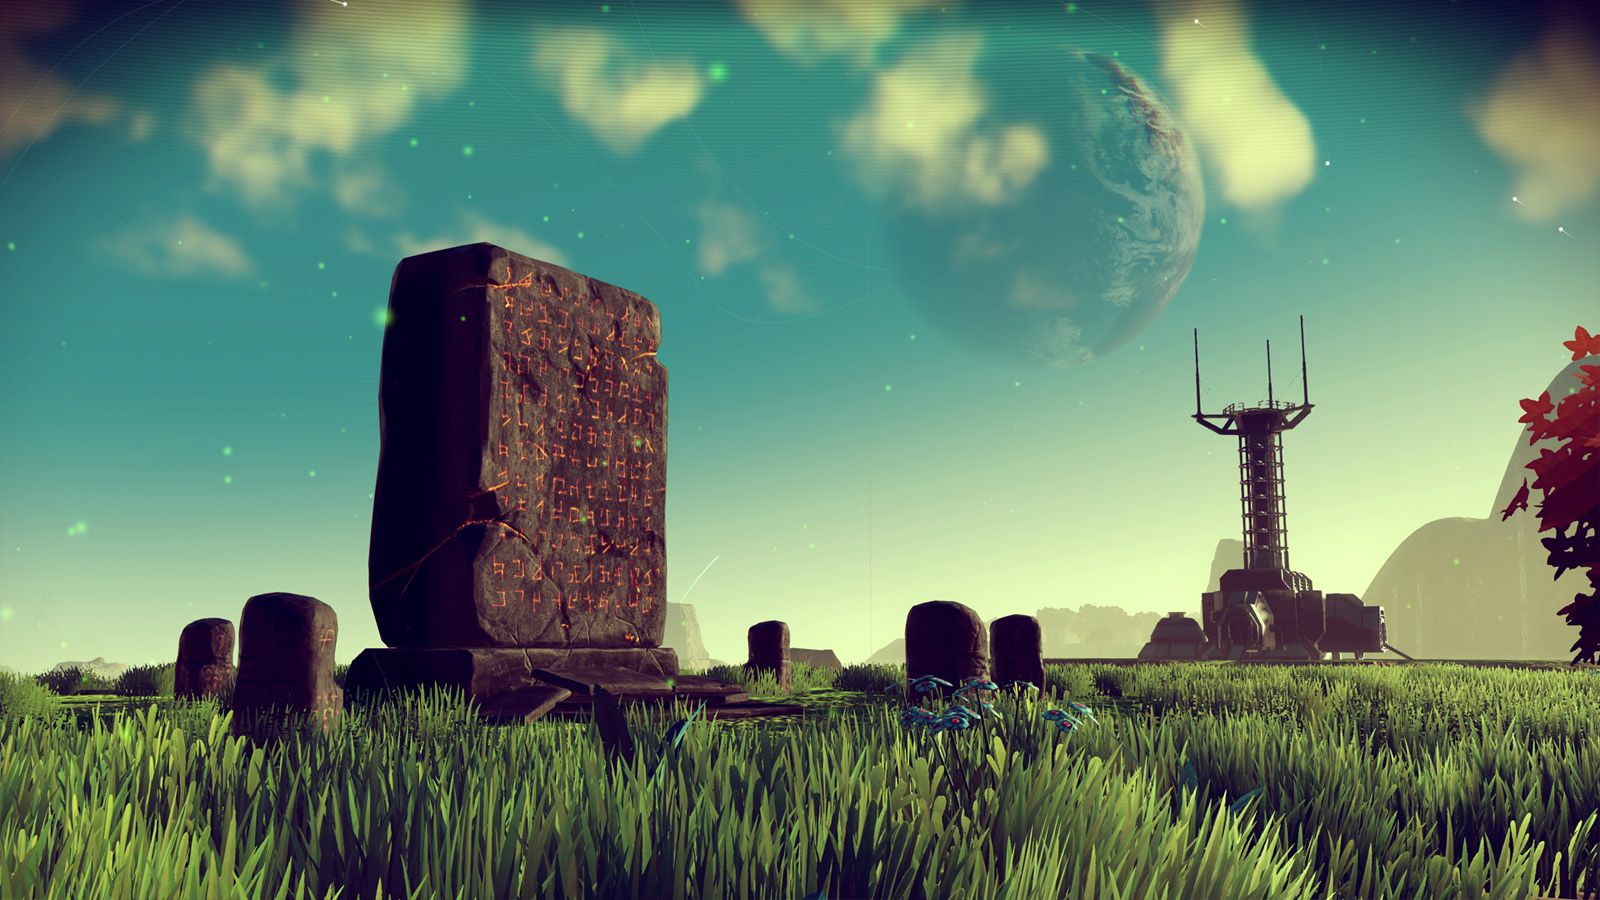 two players meet in no man’s sky guess what happened next  image 1